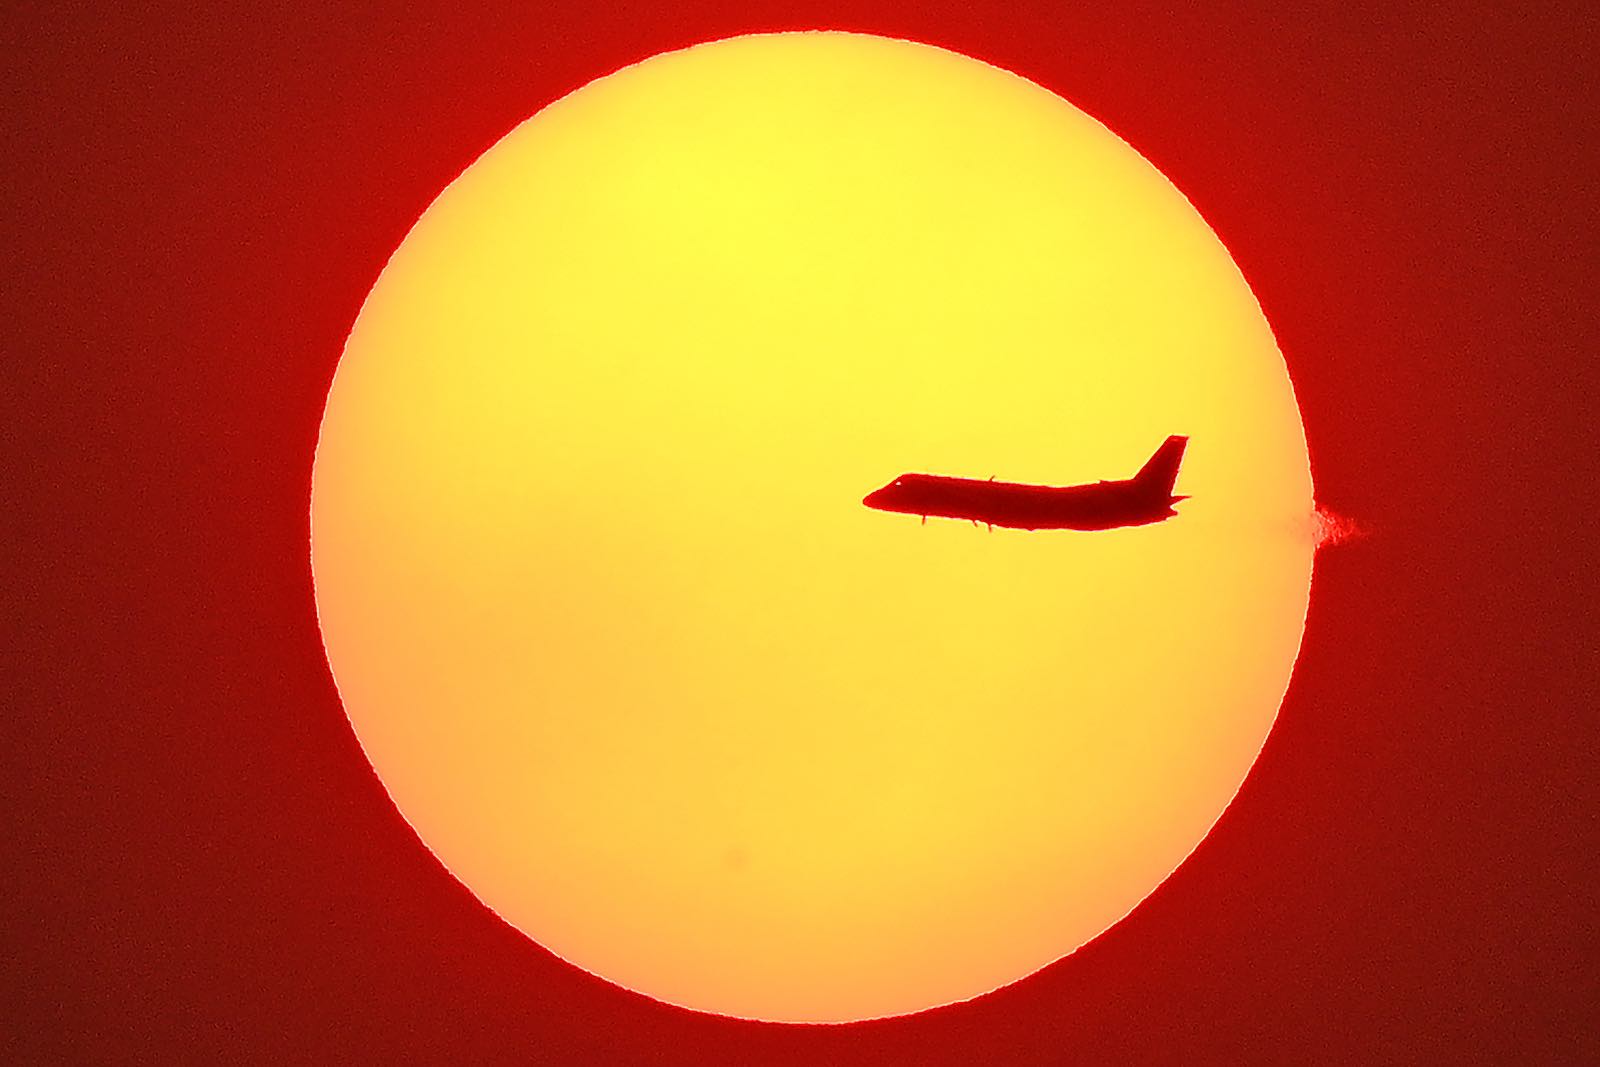 A jet passes in front of a smoke-shrouded sun in Sydney, 4 December 2019 (Photo: Saeed Khan/AFP via Getty Images)